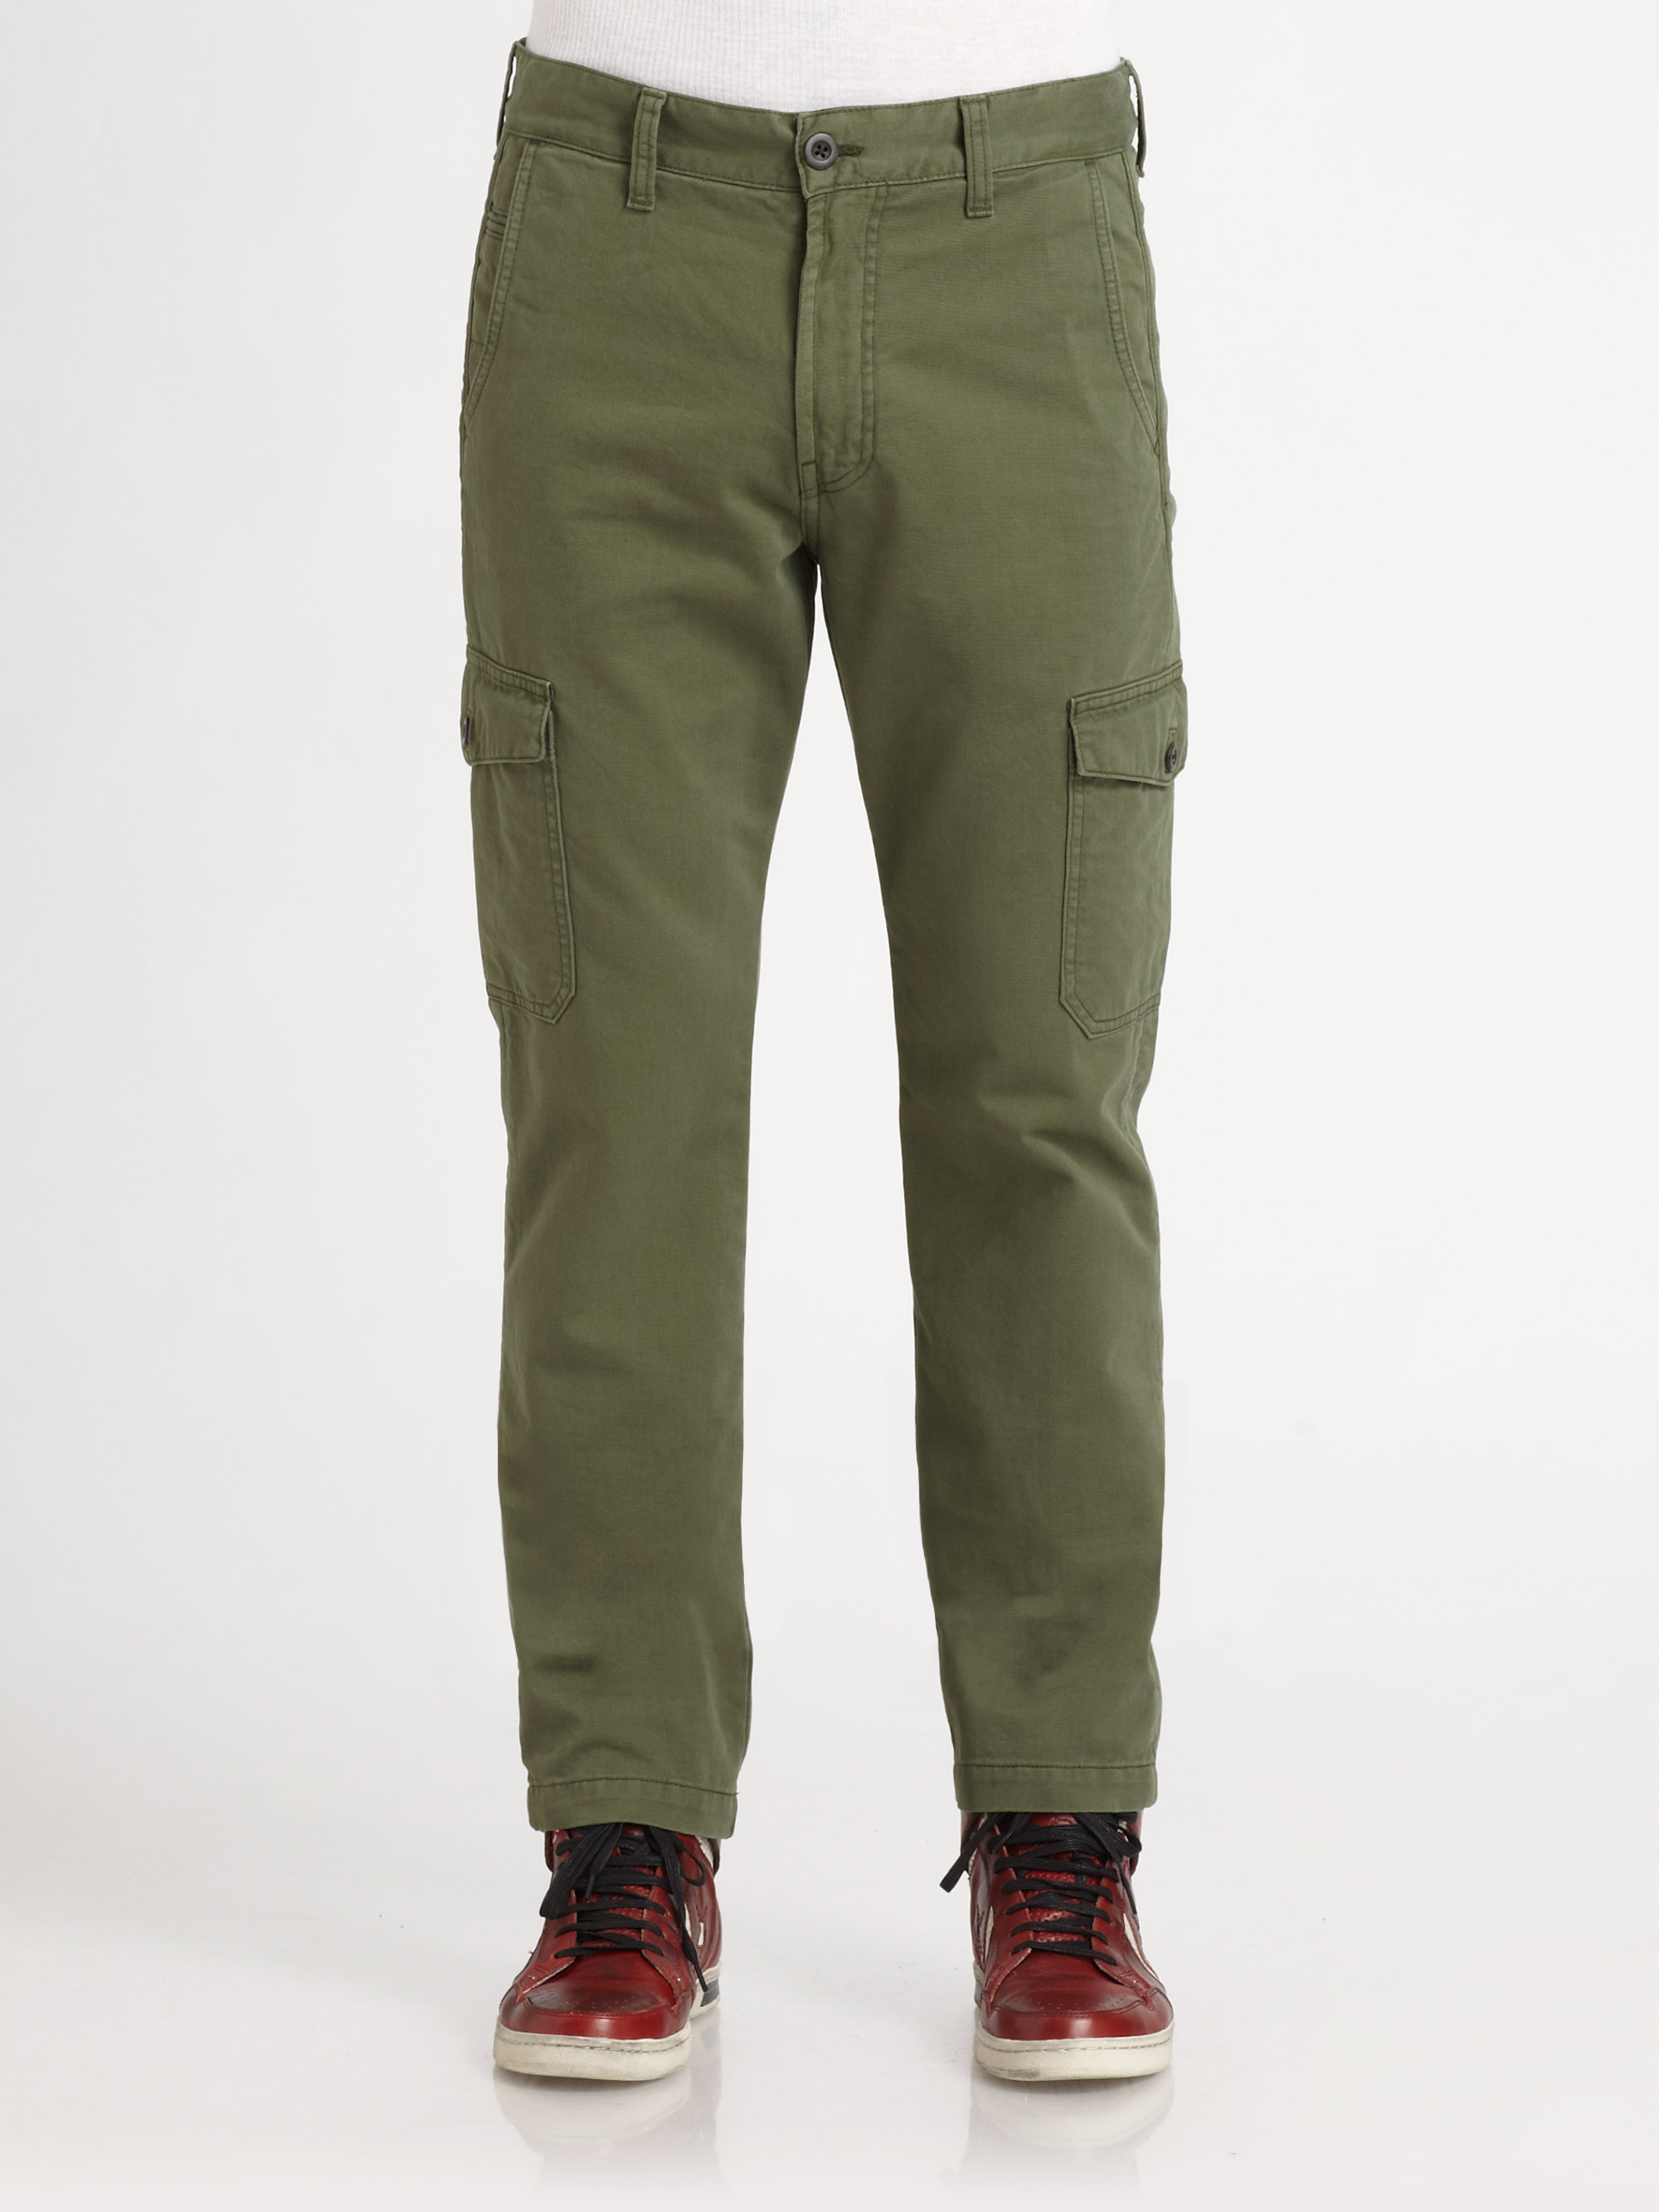 Lyst - 7 For All Mankind Chino Twill Pants in Green for Men